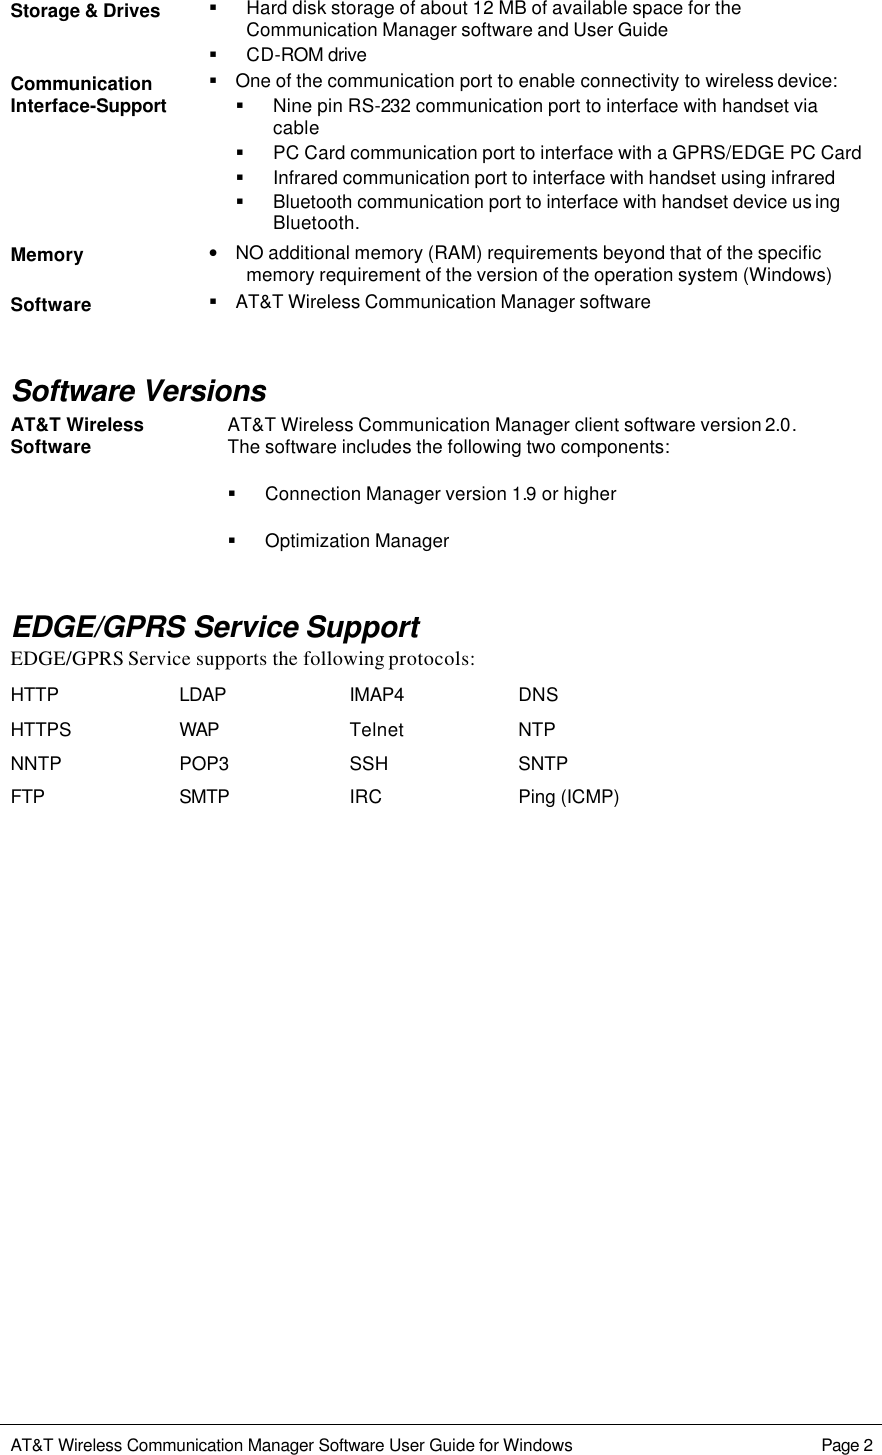   AT&amp;T Wireless Communication Manager Software User Guide for Windows    Page 2  Storage &amp; Drives § Hard disk storage of about 12 MB of available space for the Communication Manager software and User Guide § CD-ROM drive Communication Interface-Support § One of the communication port to enable connectivity to wireless device: § Nine pin RS-232 communication port to interface with handset via cable § PC Card communication port to interface with a GPRS/EDGE PC Card § Infrared communication port to interface with handset using infrared § Bluetooth communication port to interface with handset device us ing Bluetooth. Memory • NO additional memory (RAM) requirements beyond that of the specific memory requirement of the version of the operation system (Windows)  Software § AT&amp;T Wireless Communication Manager software  Software Versions AT&amp;T Wireless Communication Manager client software version 2.0.  The software includes the following two components: § Connection Manager version 1.9 or higher AT&amp;T Wireless Software § Optimization Manager   EDGE/GPRS Service Support EDGE/GPRS Service supports the following protocols: HTTP LDAP IMAP4 DNS HTTPS WAP Telnet NTP NNTP POP3 SSH SNTP FTP SMTP IRC Ping (ICMP)  